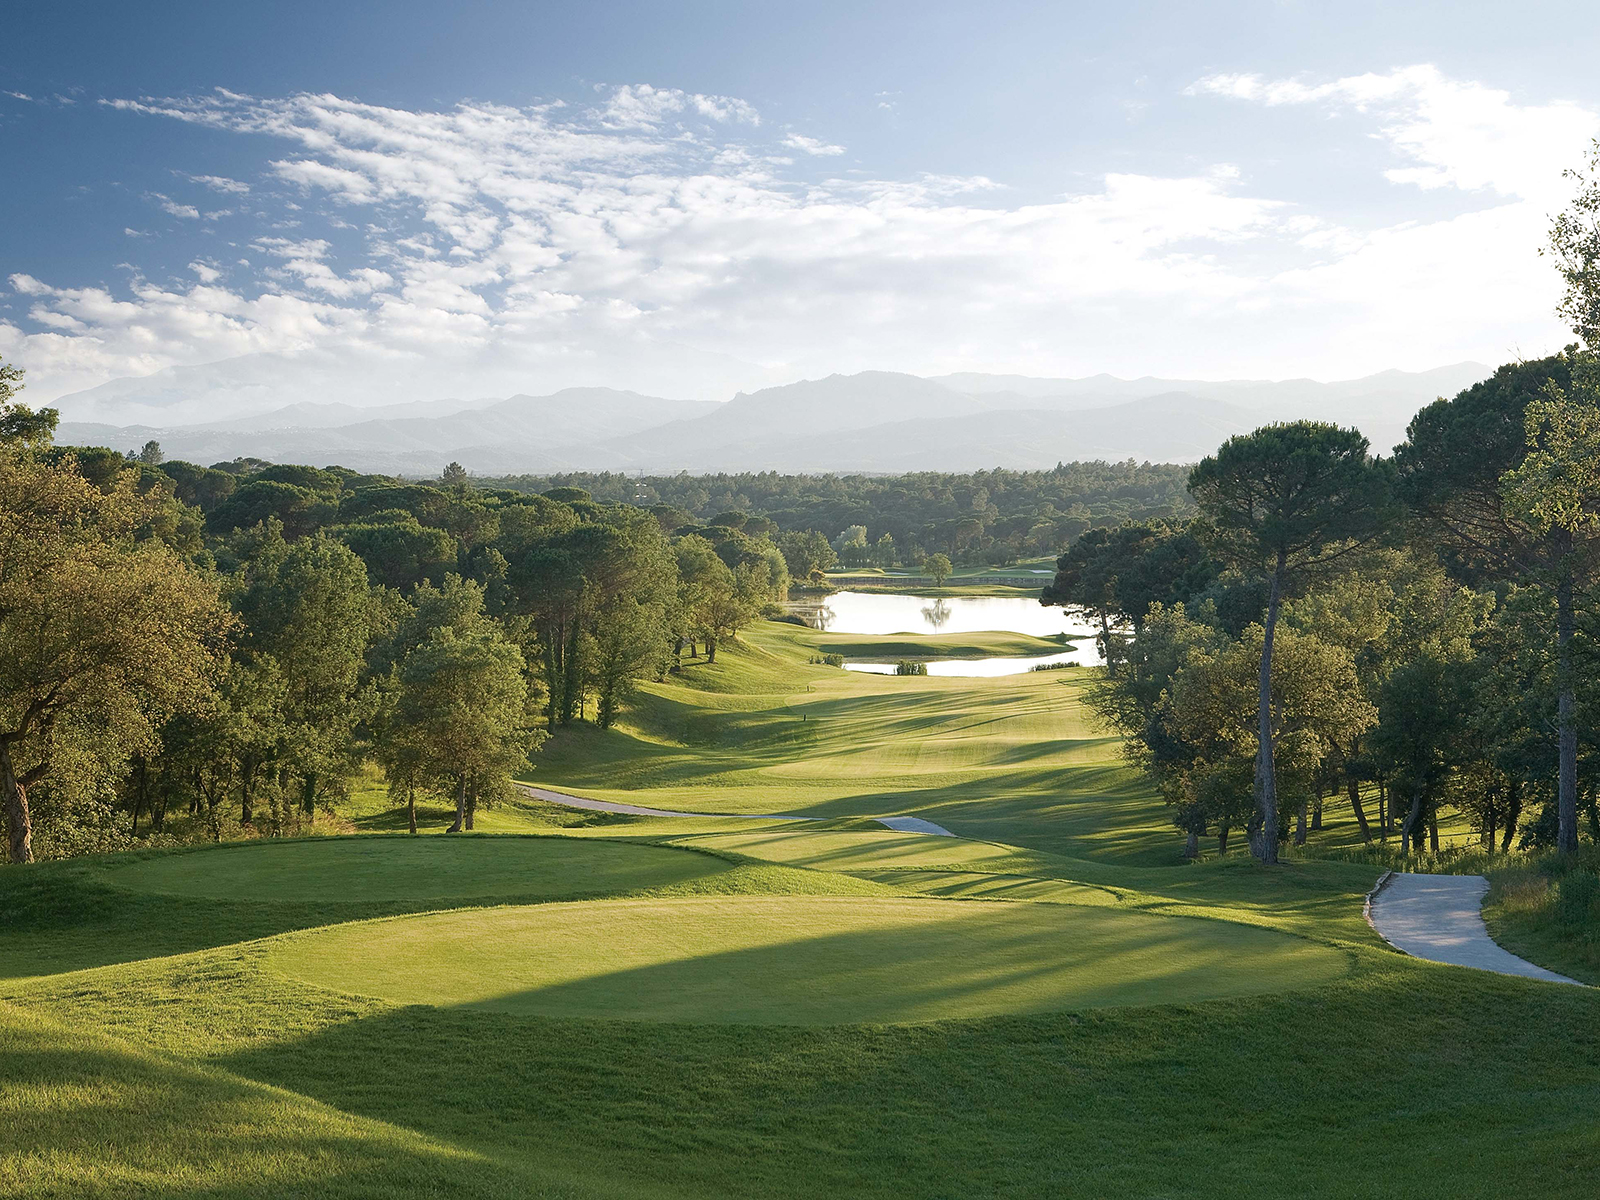 Beautiful shot of a golf course in Spain